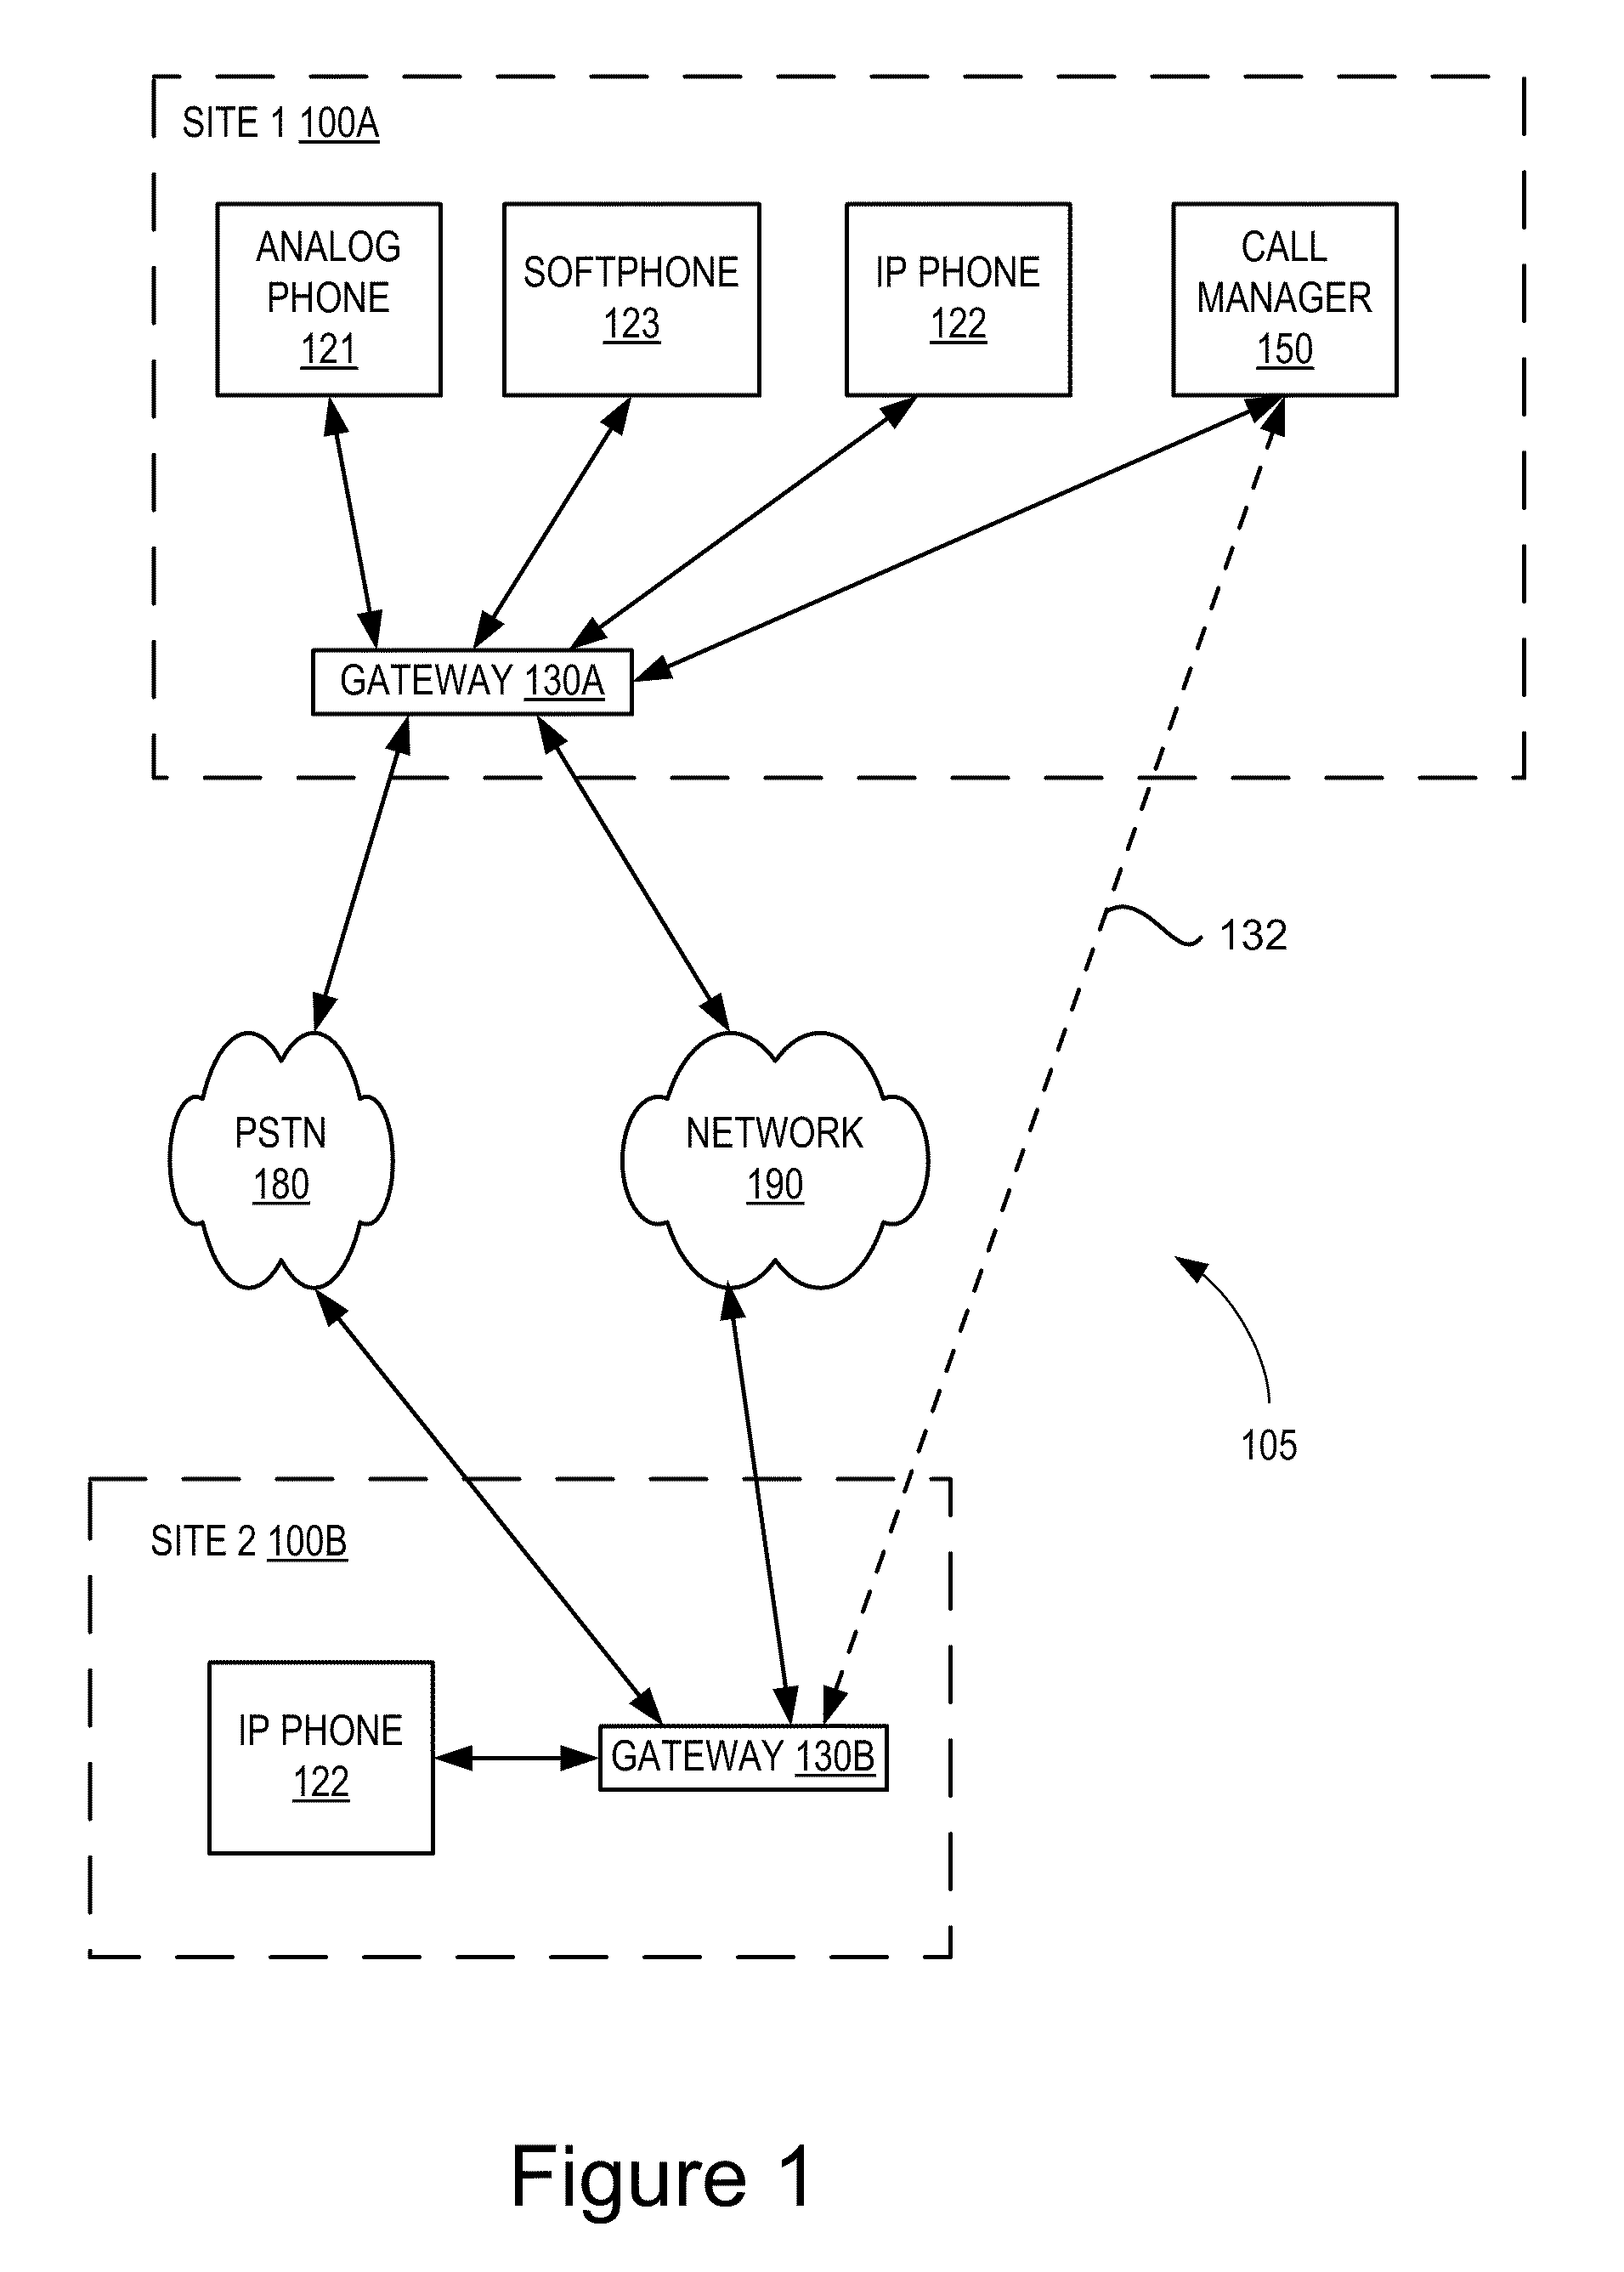 User activated bypass for IP media